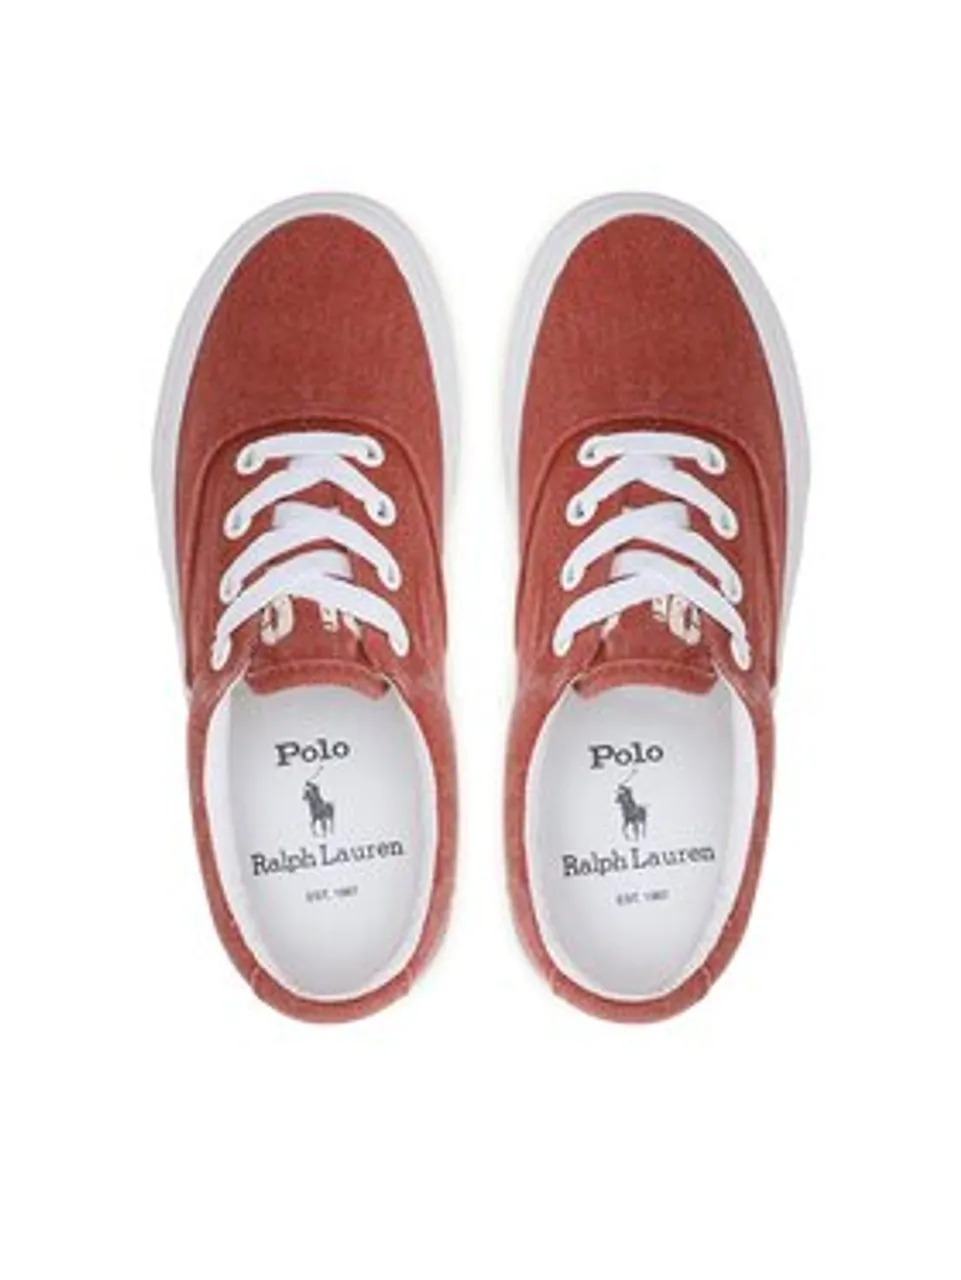 Polo Ralph Lauren Sneakers aus Stoff 804907203001 Rot